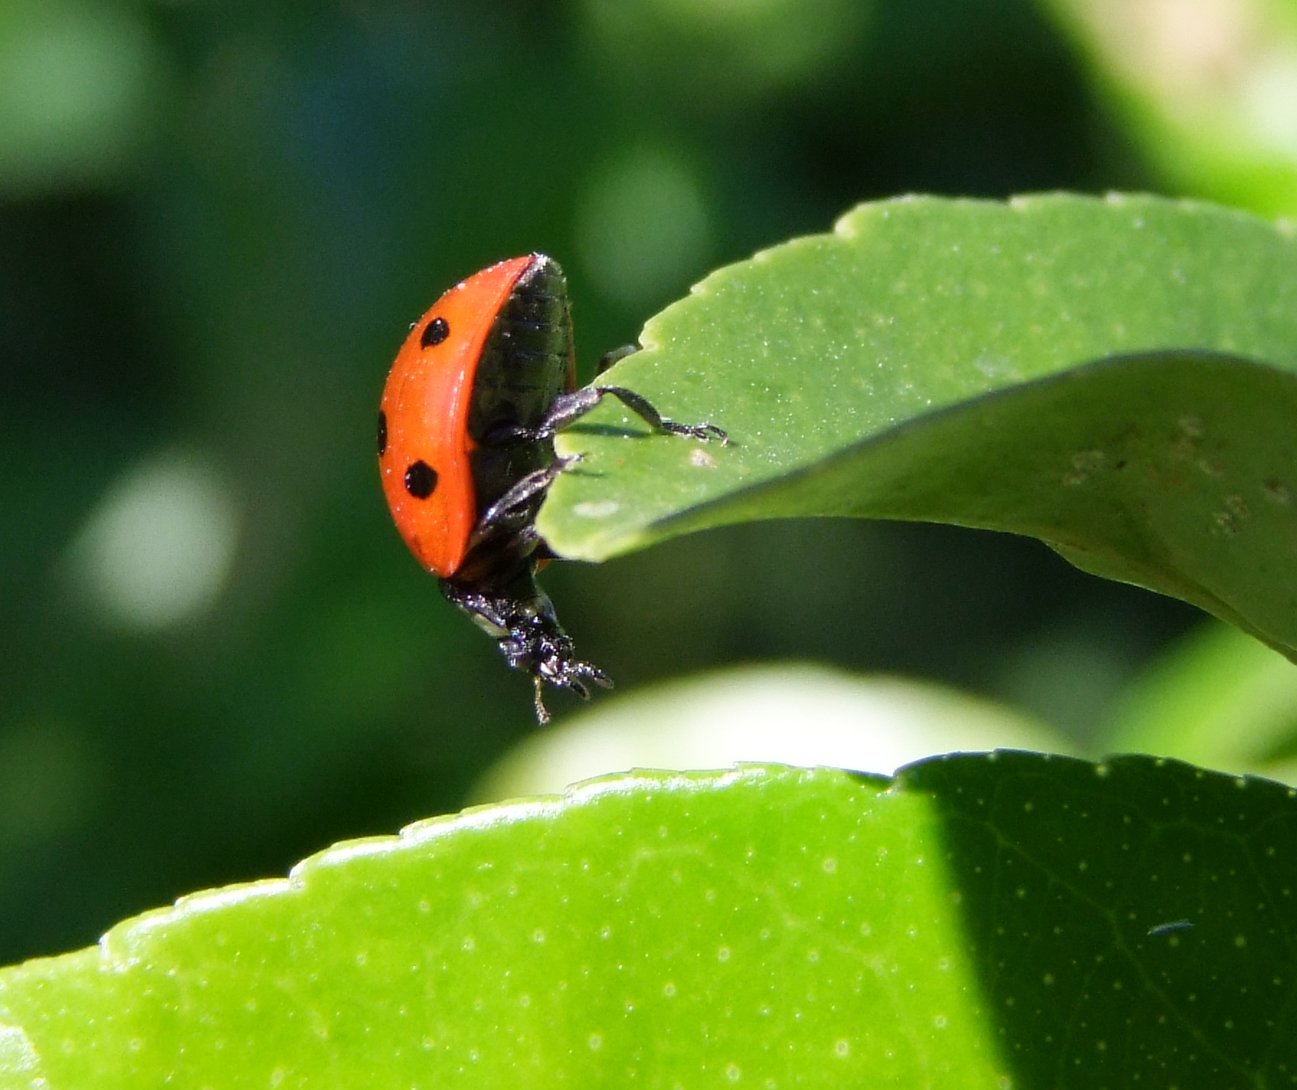 Heading Down - Insects, Arachnids, Reptiles & Amphibians, Ladybird | Bug | Insect | Leaf | Red | Black | Spotty